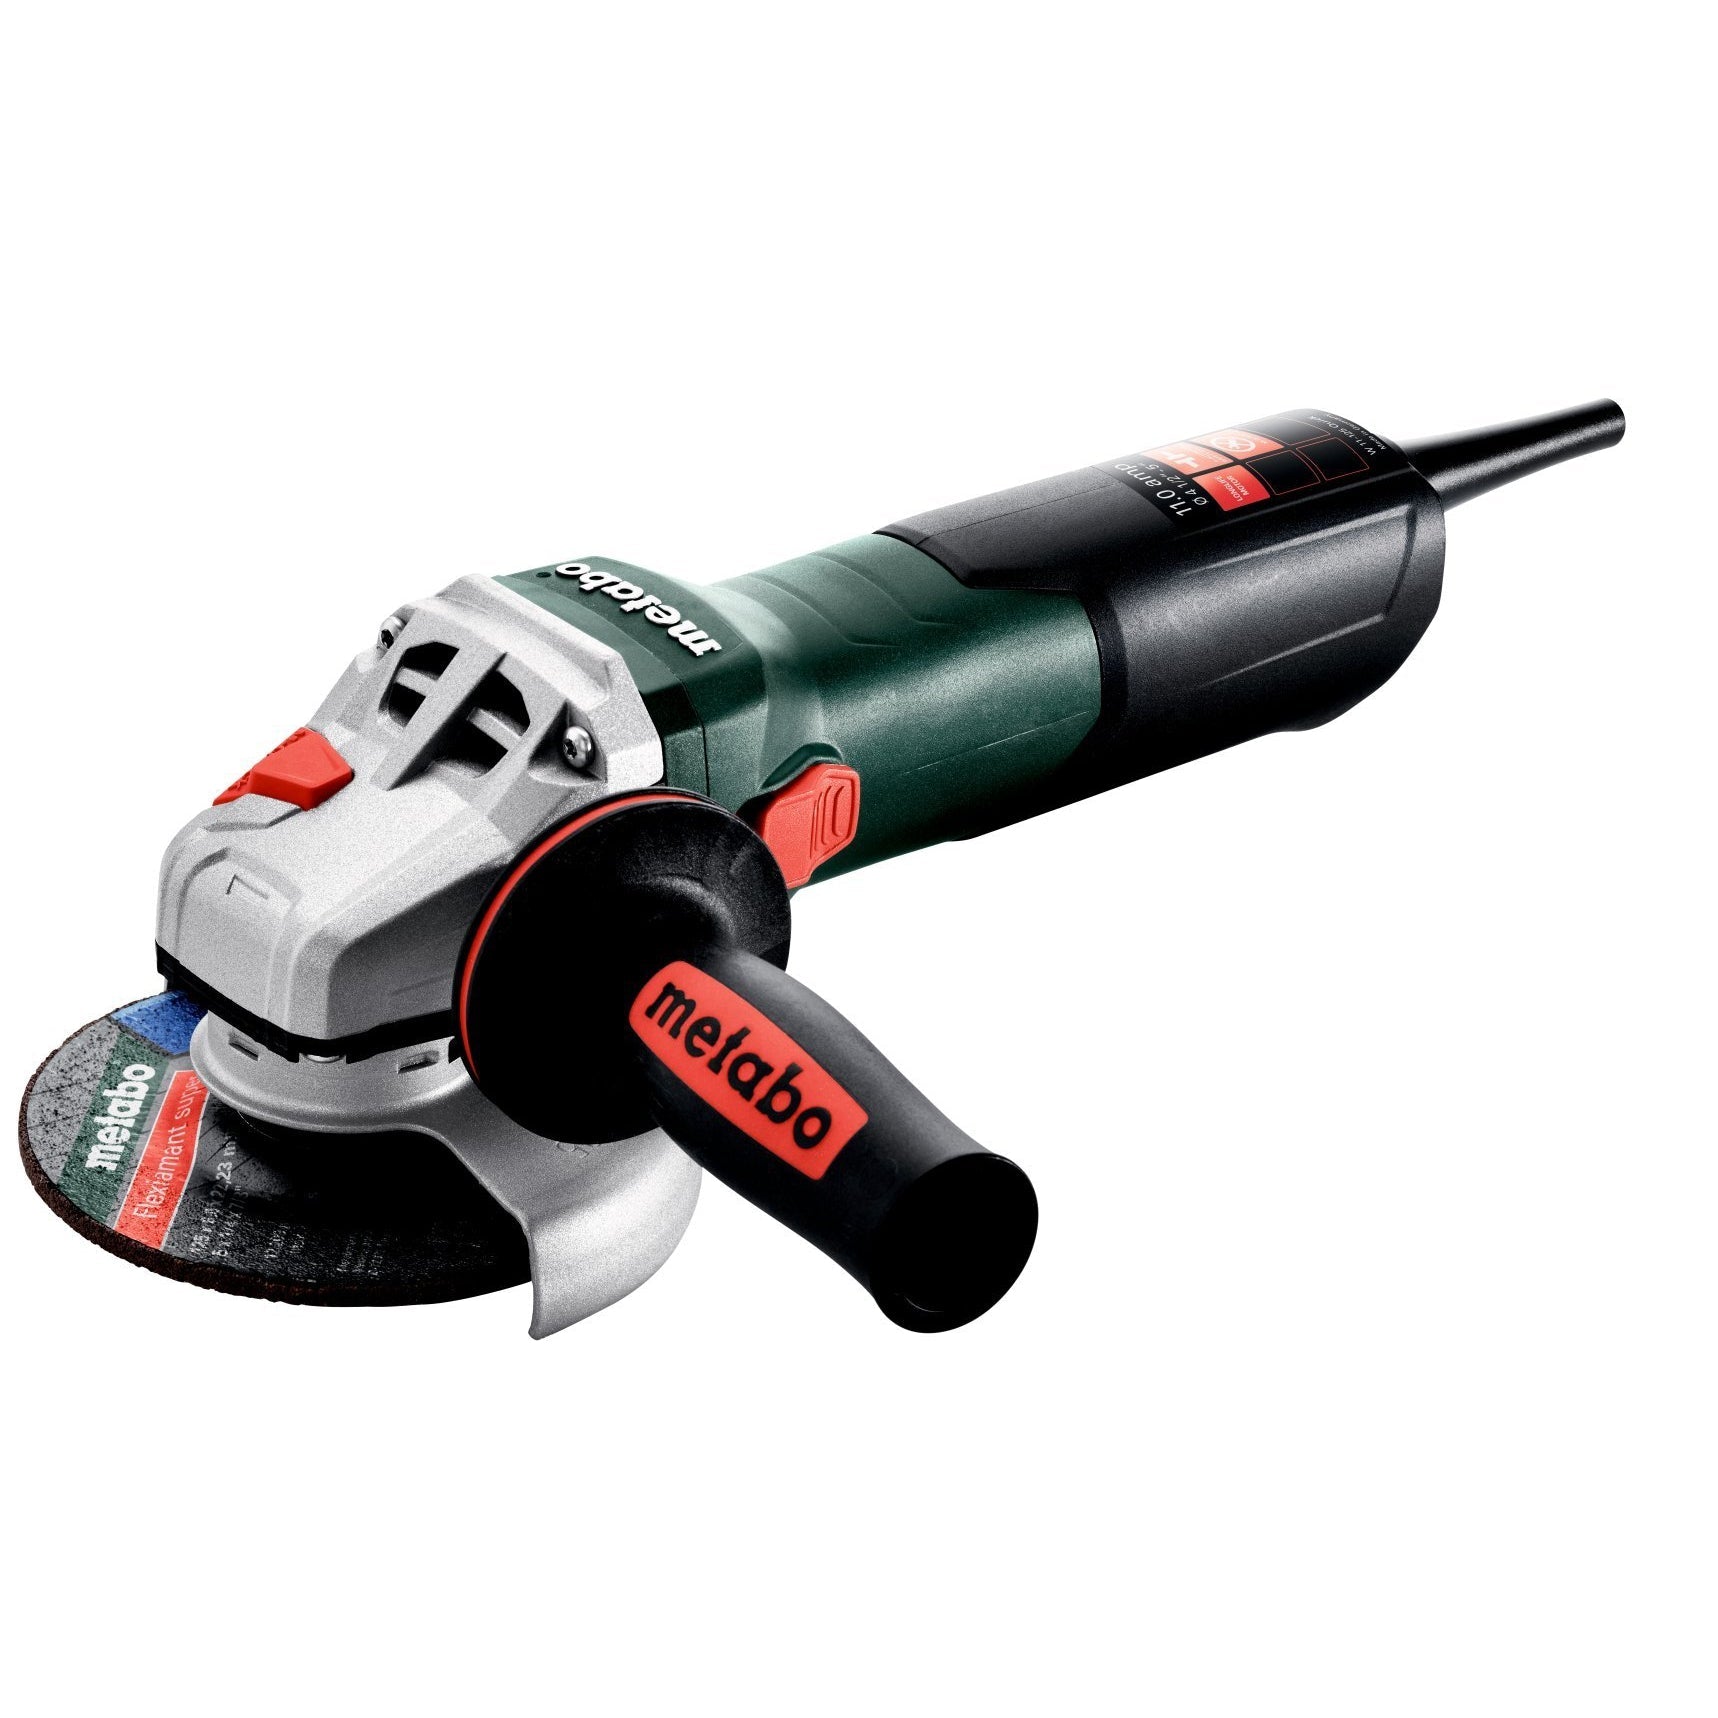 Metabo W-11-125 4.5"-5" Quick Angle Grinder - 603623420